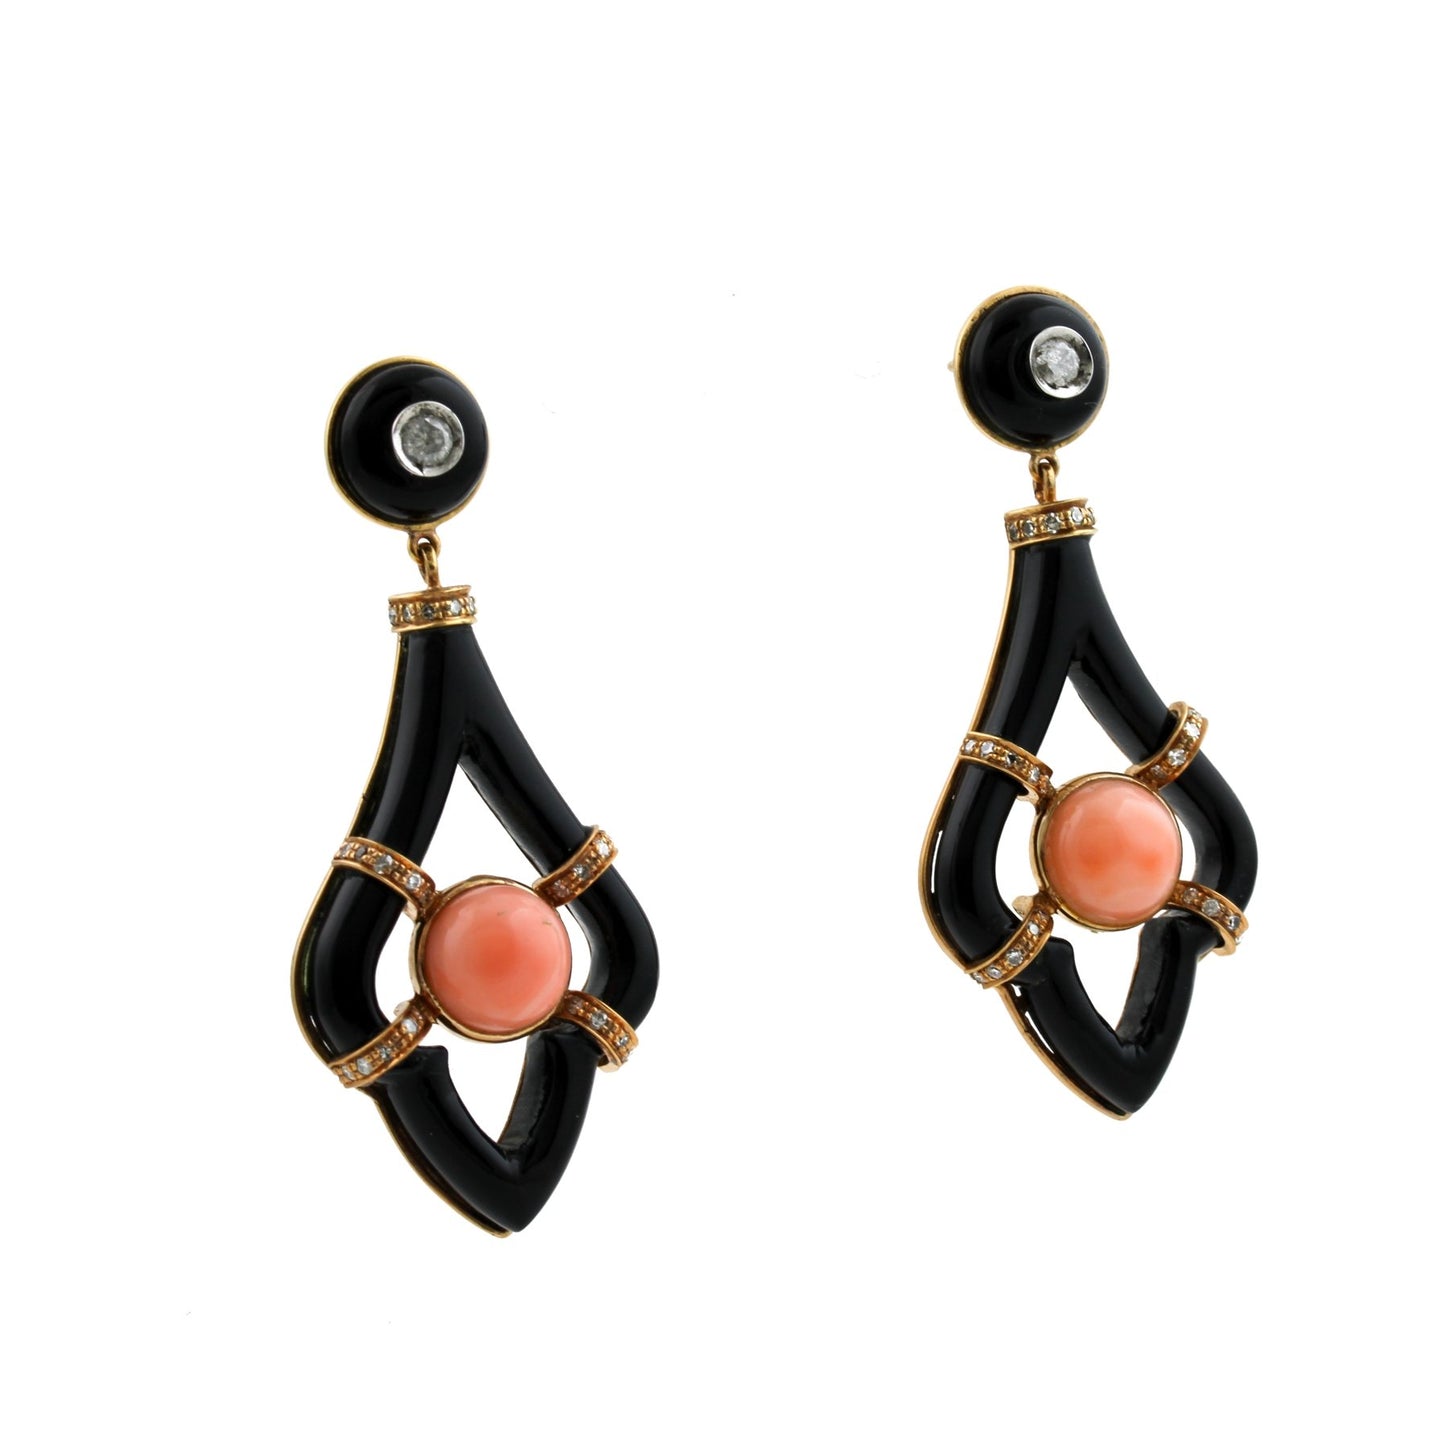 Vintage French Earrings x Onyx x Pink Coral - Kingdom Jewelry